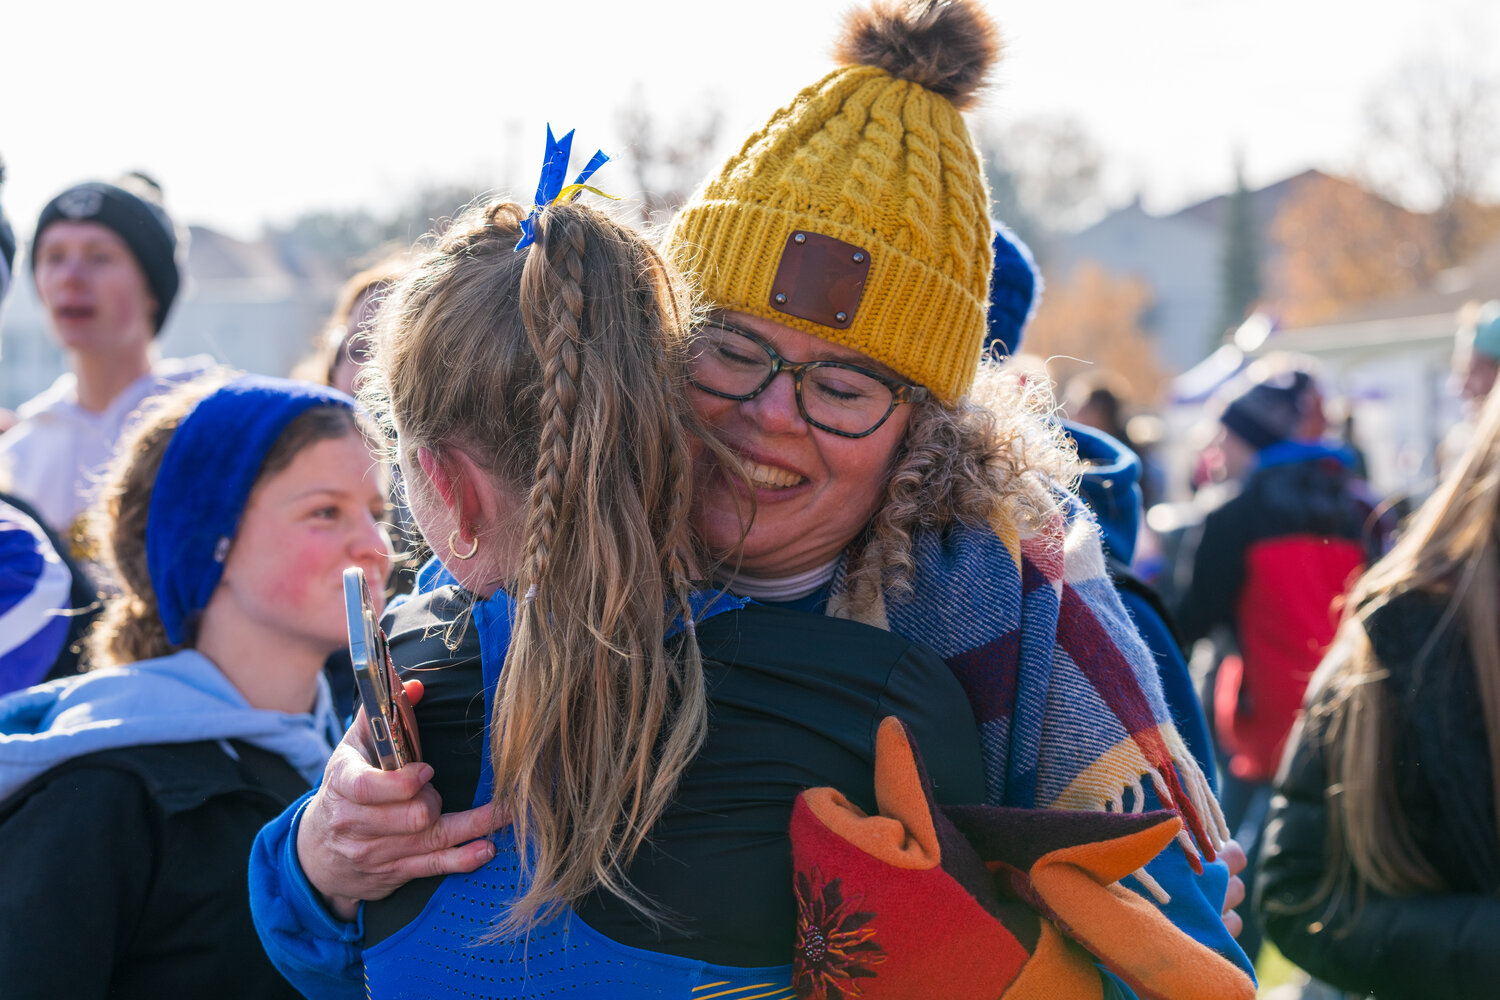 Linnea’s mom, Lizbet, is her biggest fan. You can see her running the course to get to as many cheering points for her daughter as she can. She is always there at the finish line for a supportive and congratulatory hug at the end of each race. She has the same proud smile too.